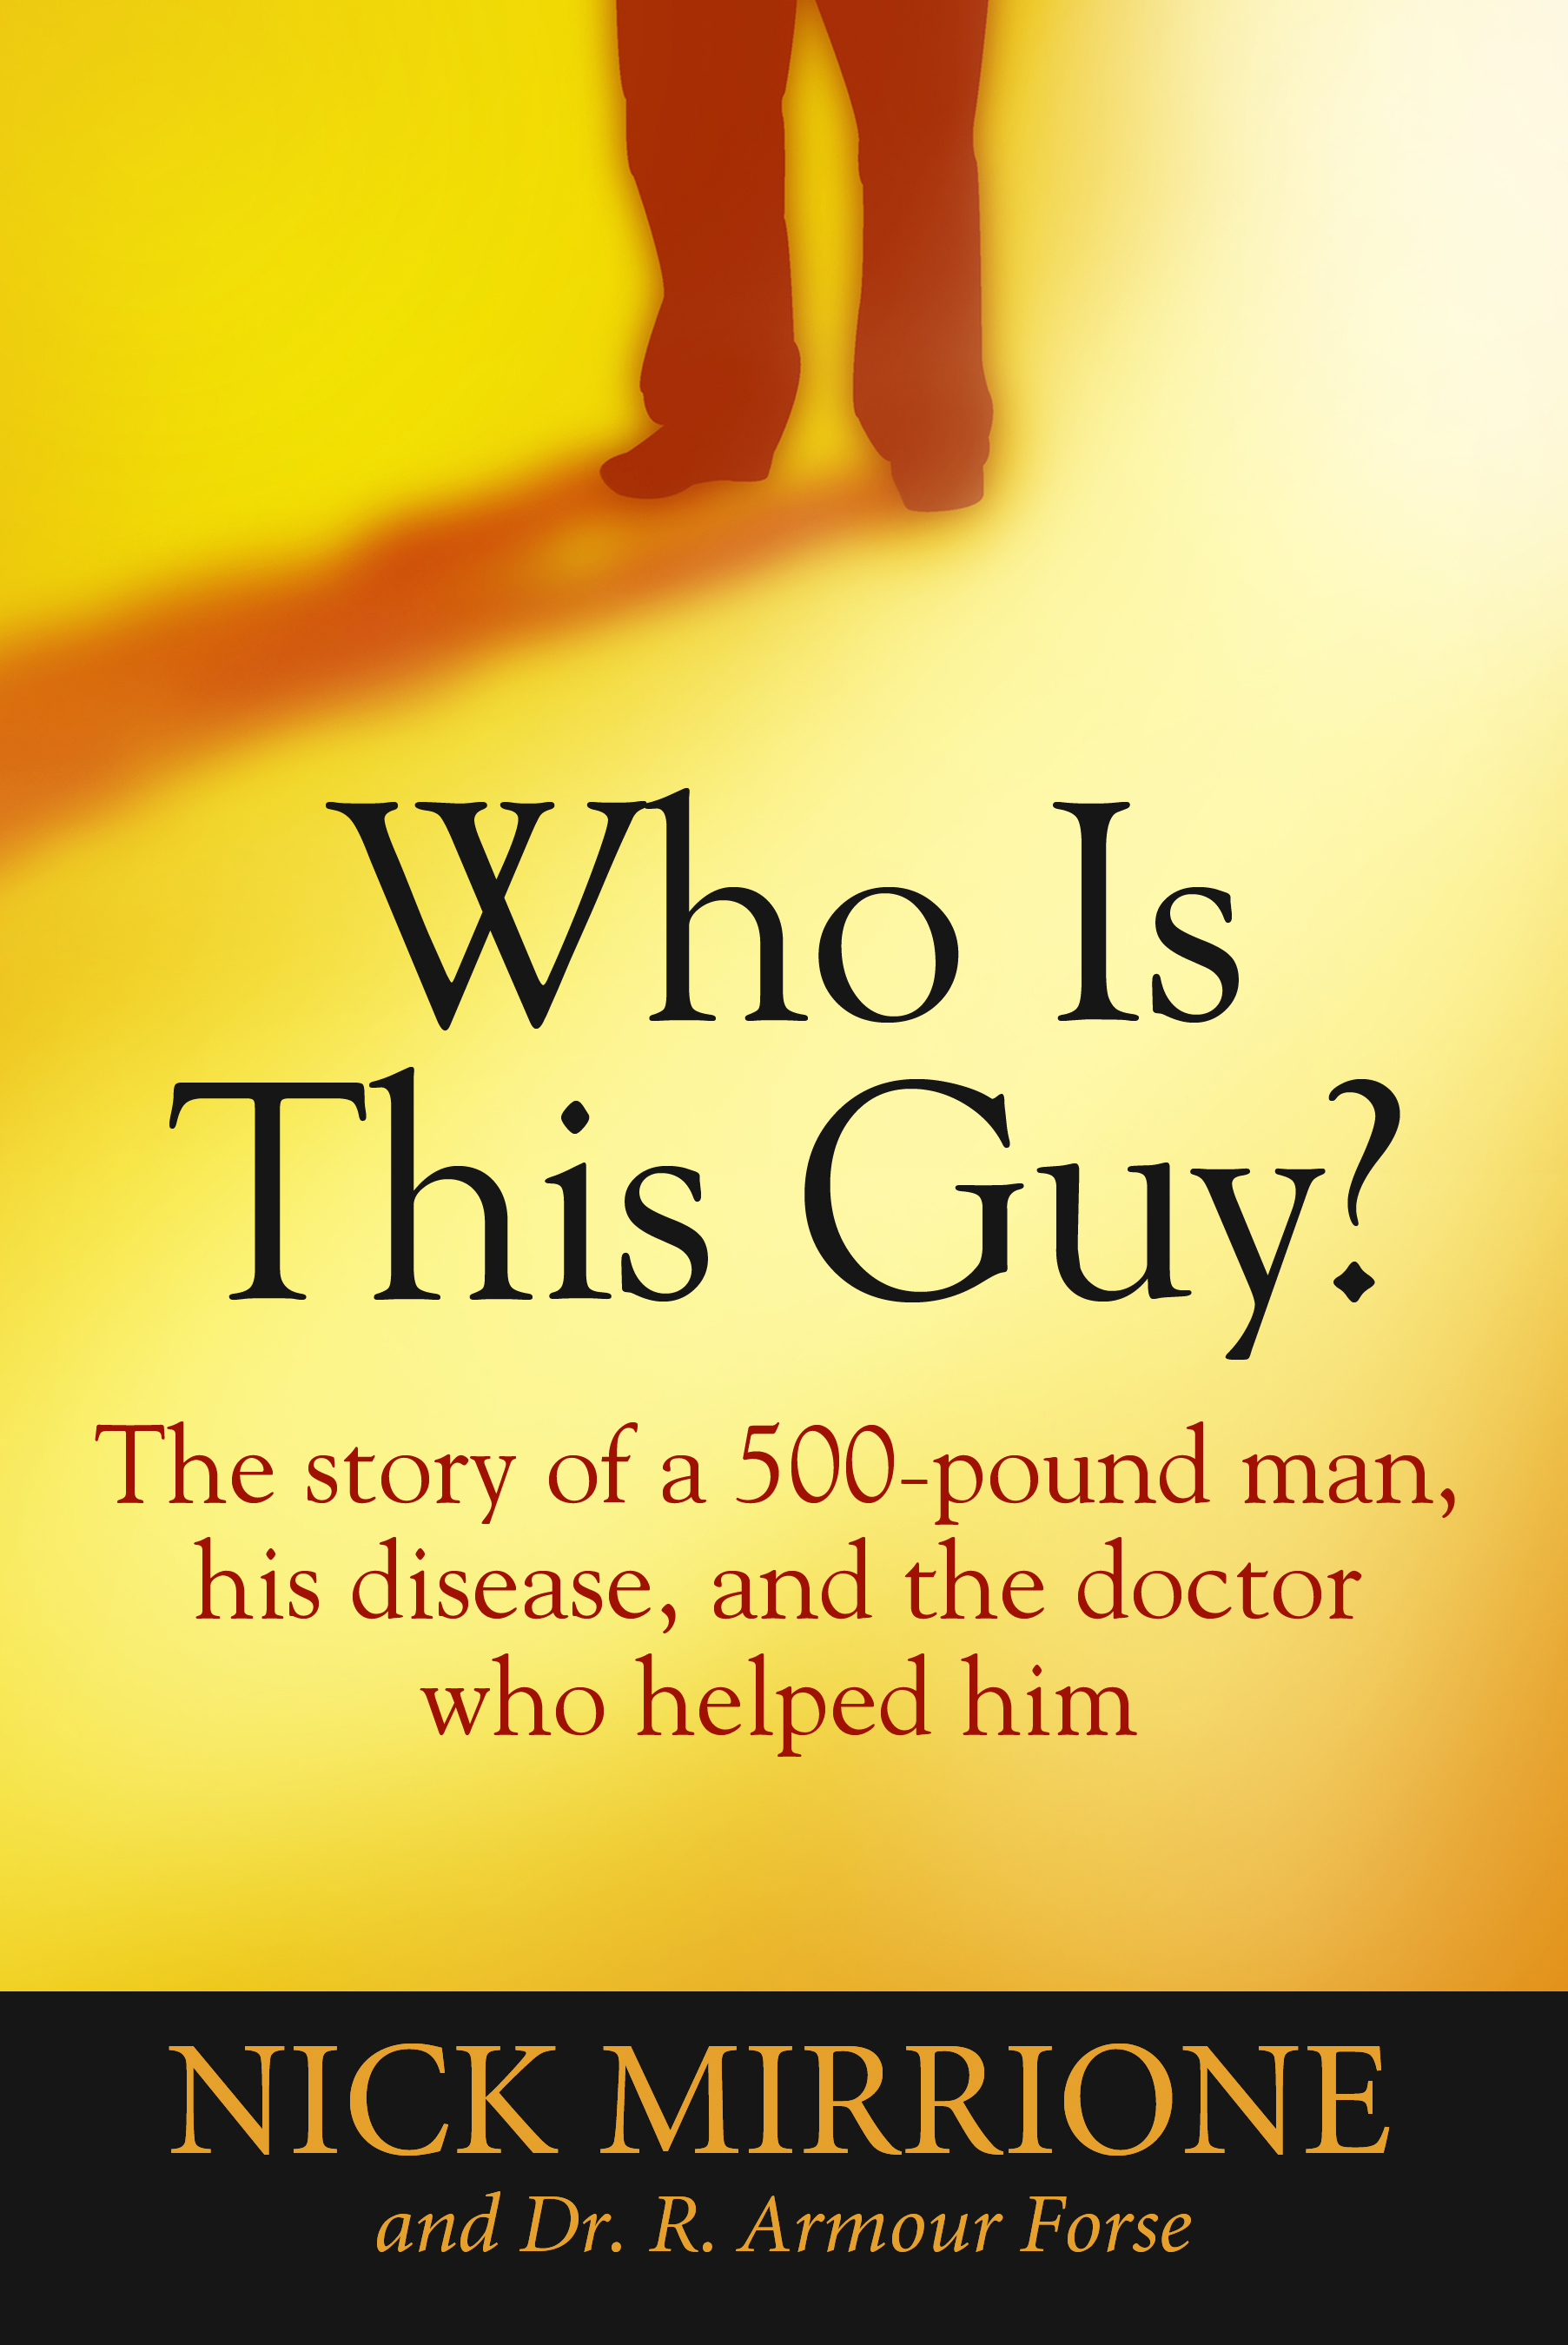 ON AMAZON: "Who Is This Guy: The Story of a 500 Pound Man, His Disease, and the Doctor Who Helped Him", has just been released to rave reviews from mainstream readers and the healthcare community.